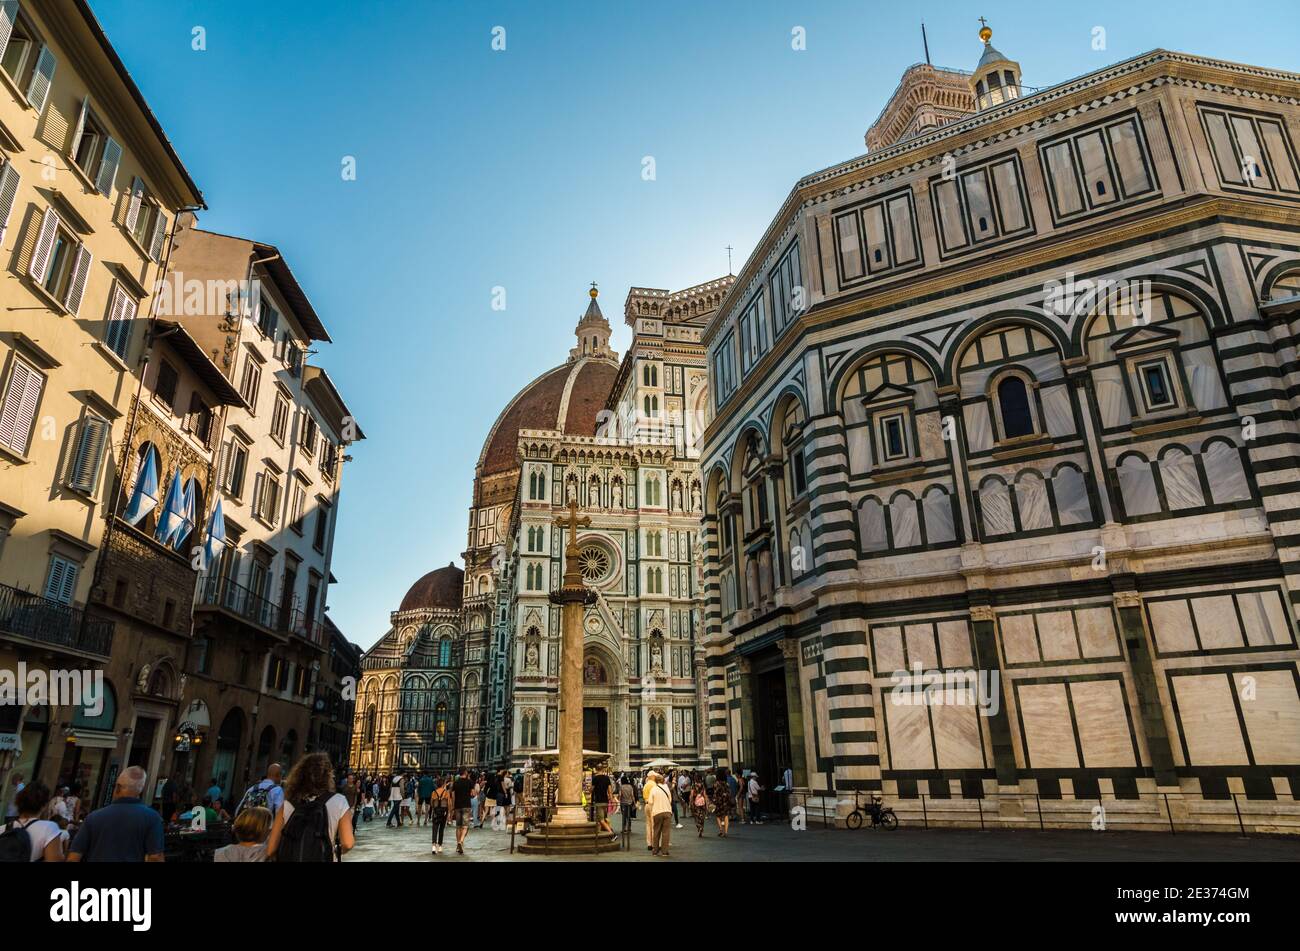 View of Piazza del Duomo in Florence. The square contains the San Zanobi Column next to the Baptistery San Giovanni. Behind is the Santa Maria del... Stock Photo